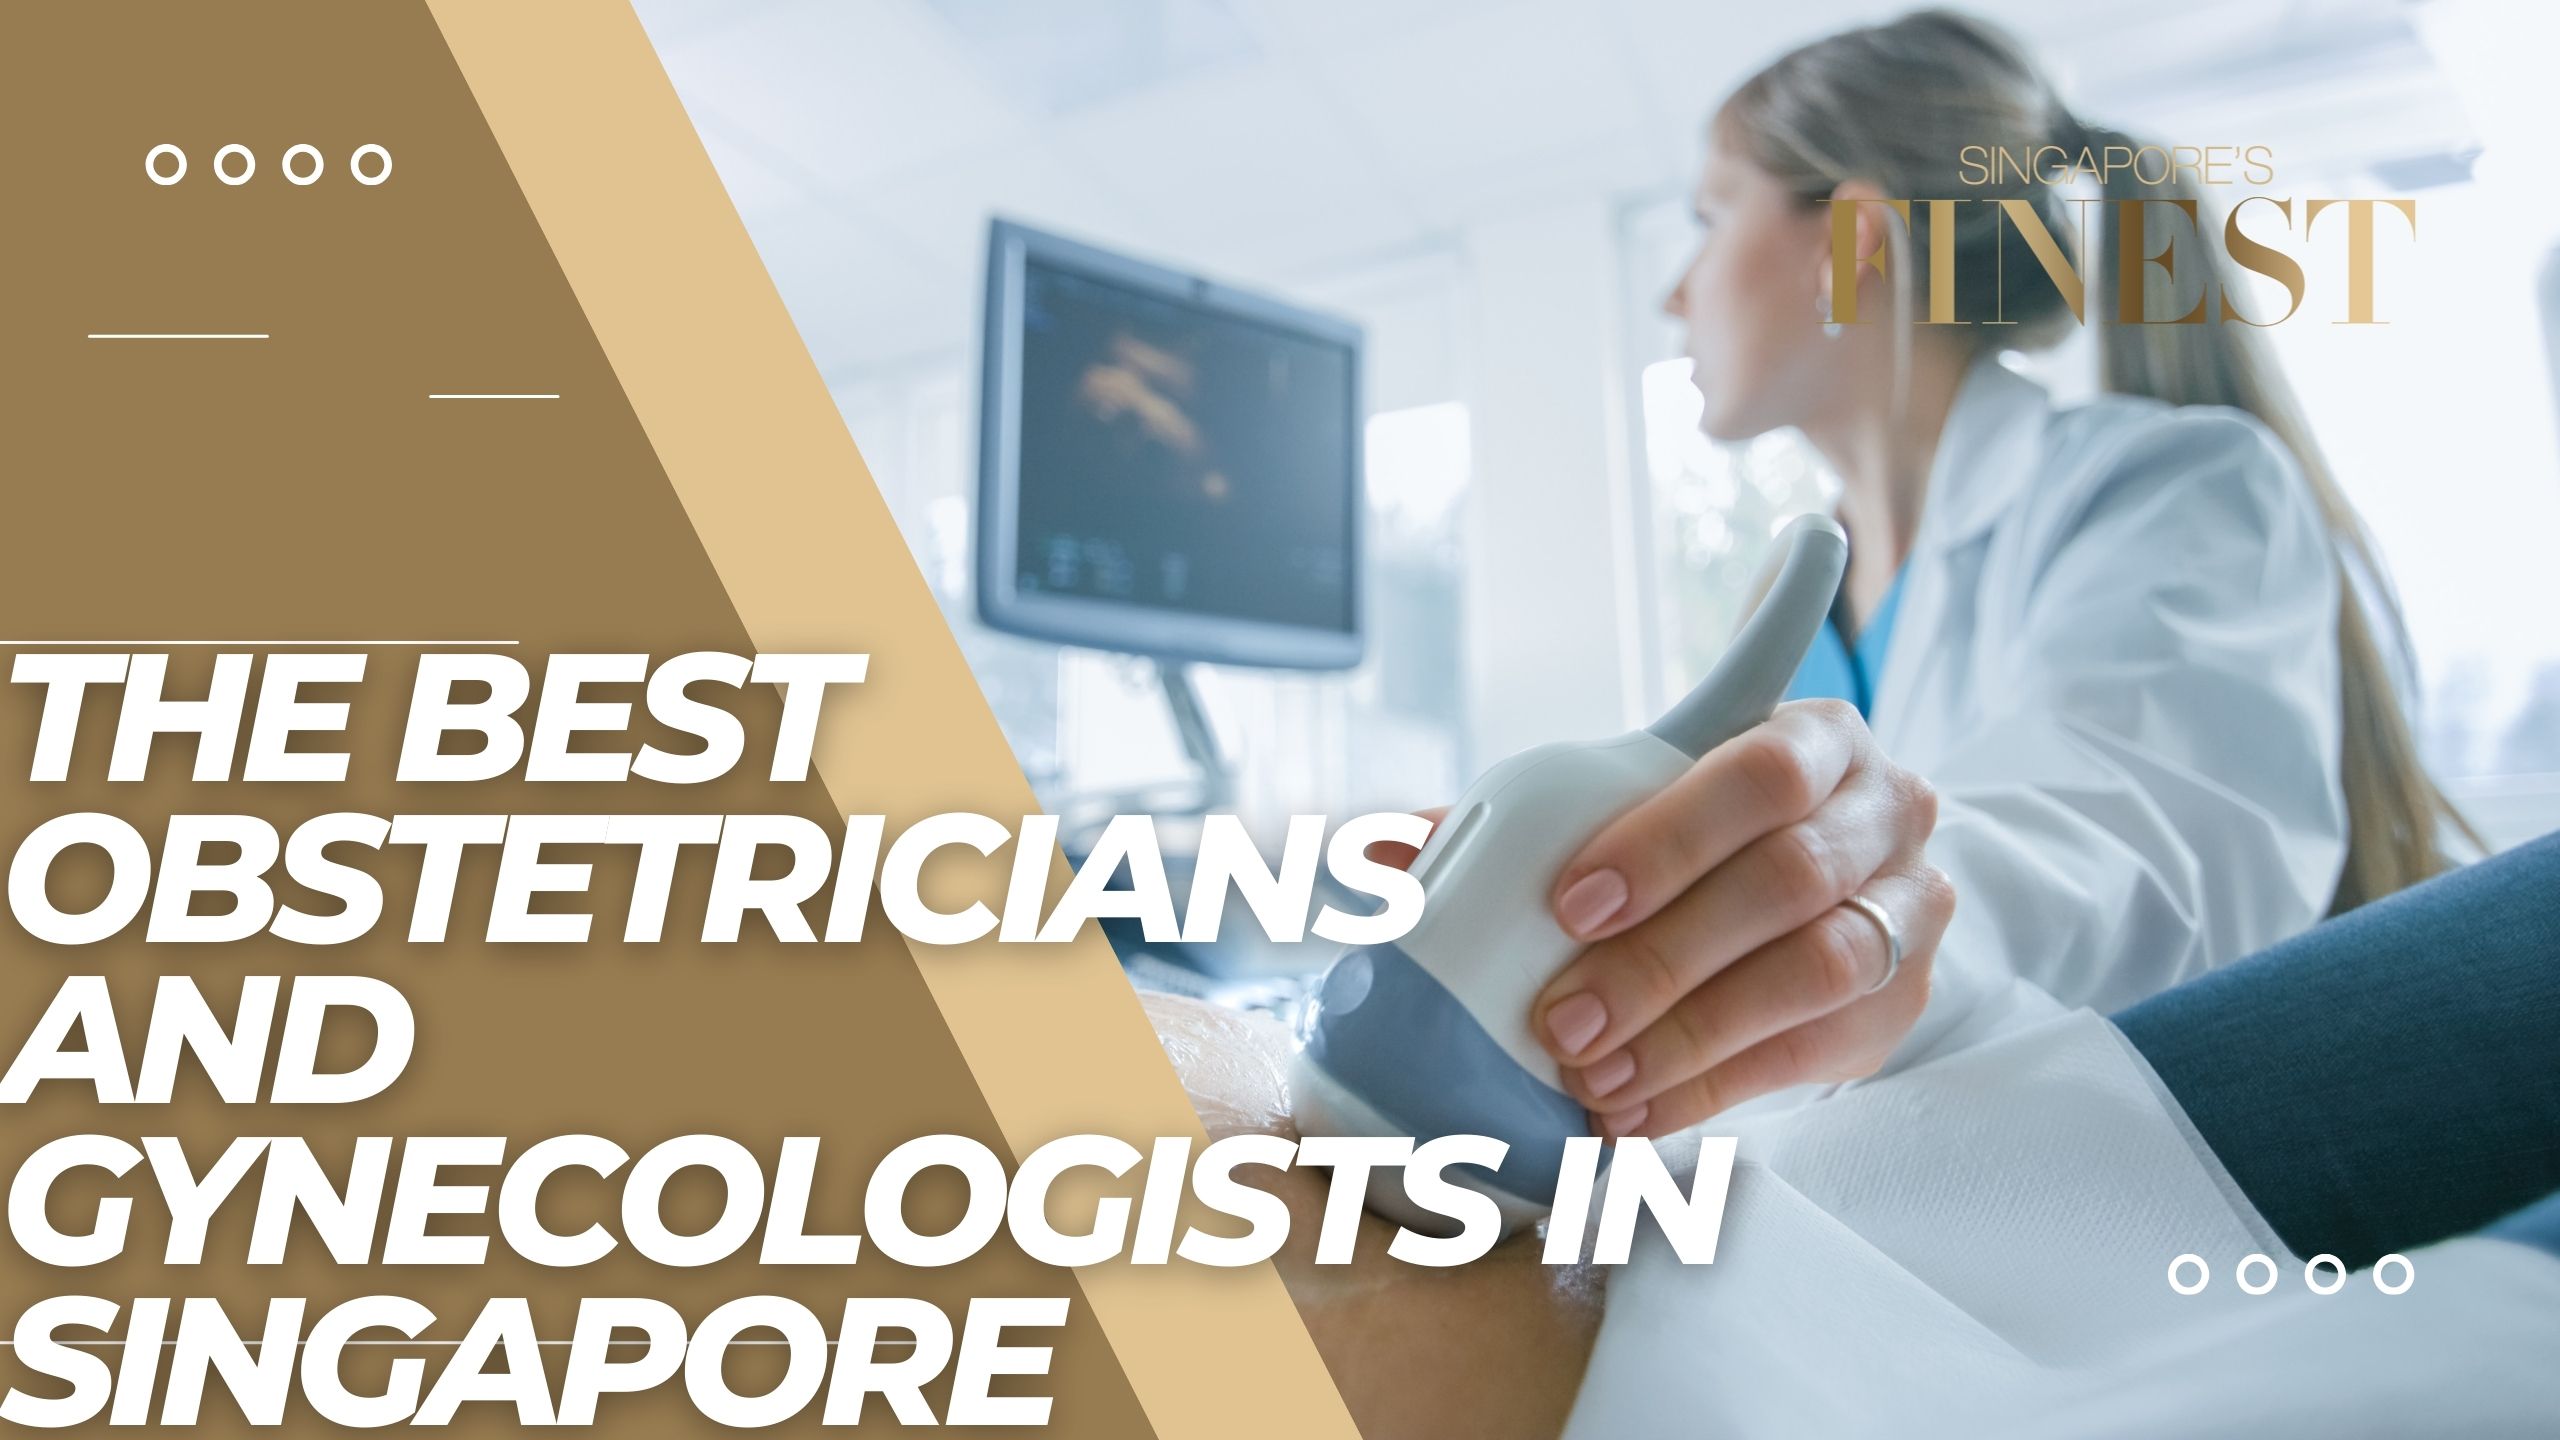 The Finest Obstetricians and Gynecologists in Singapore